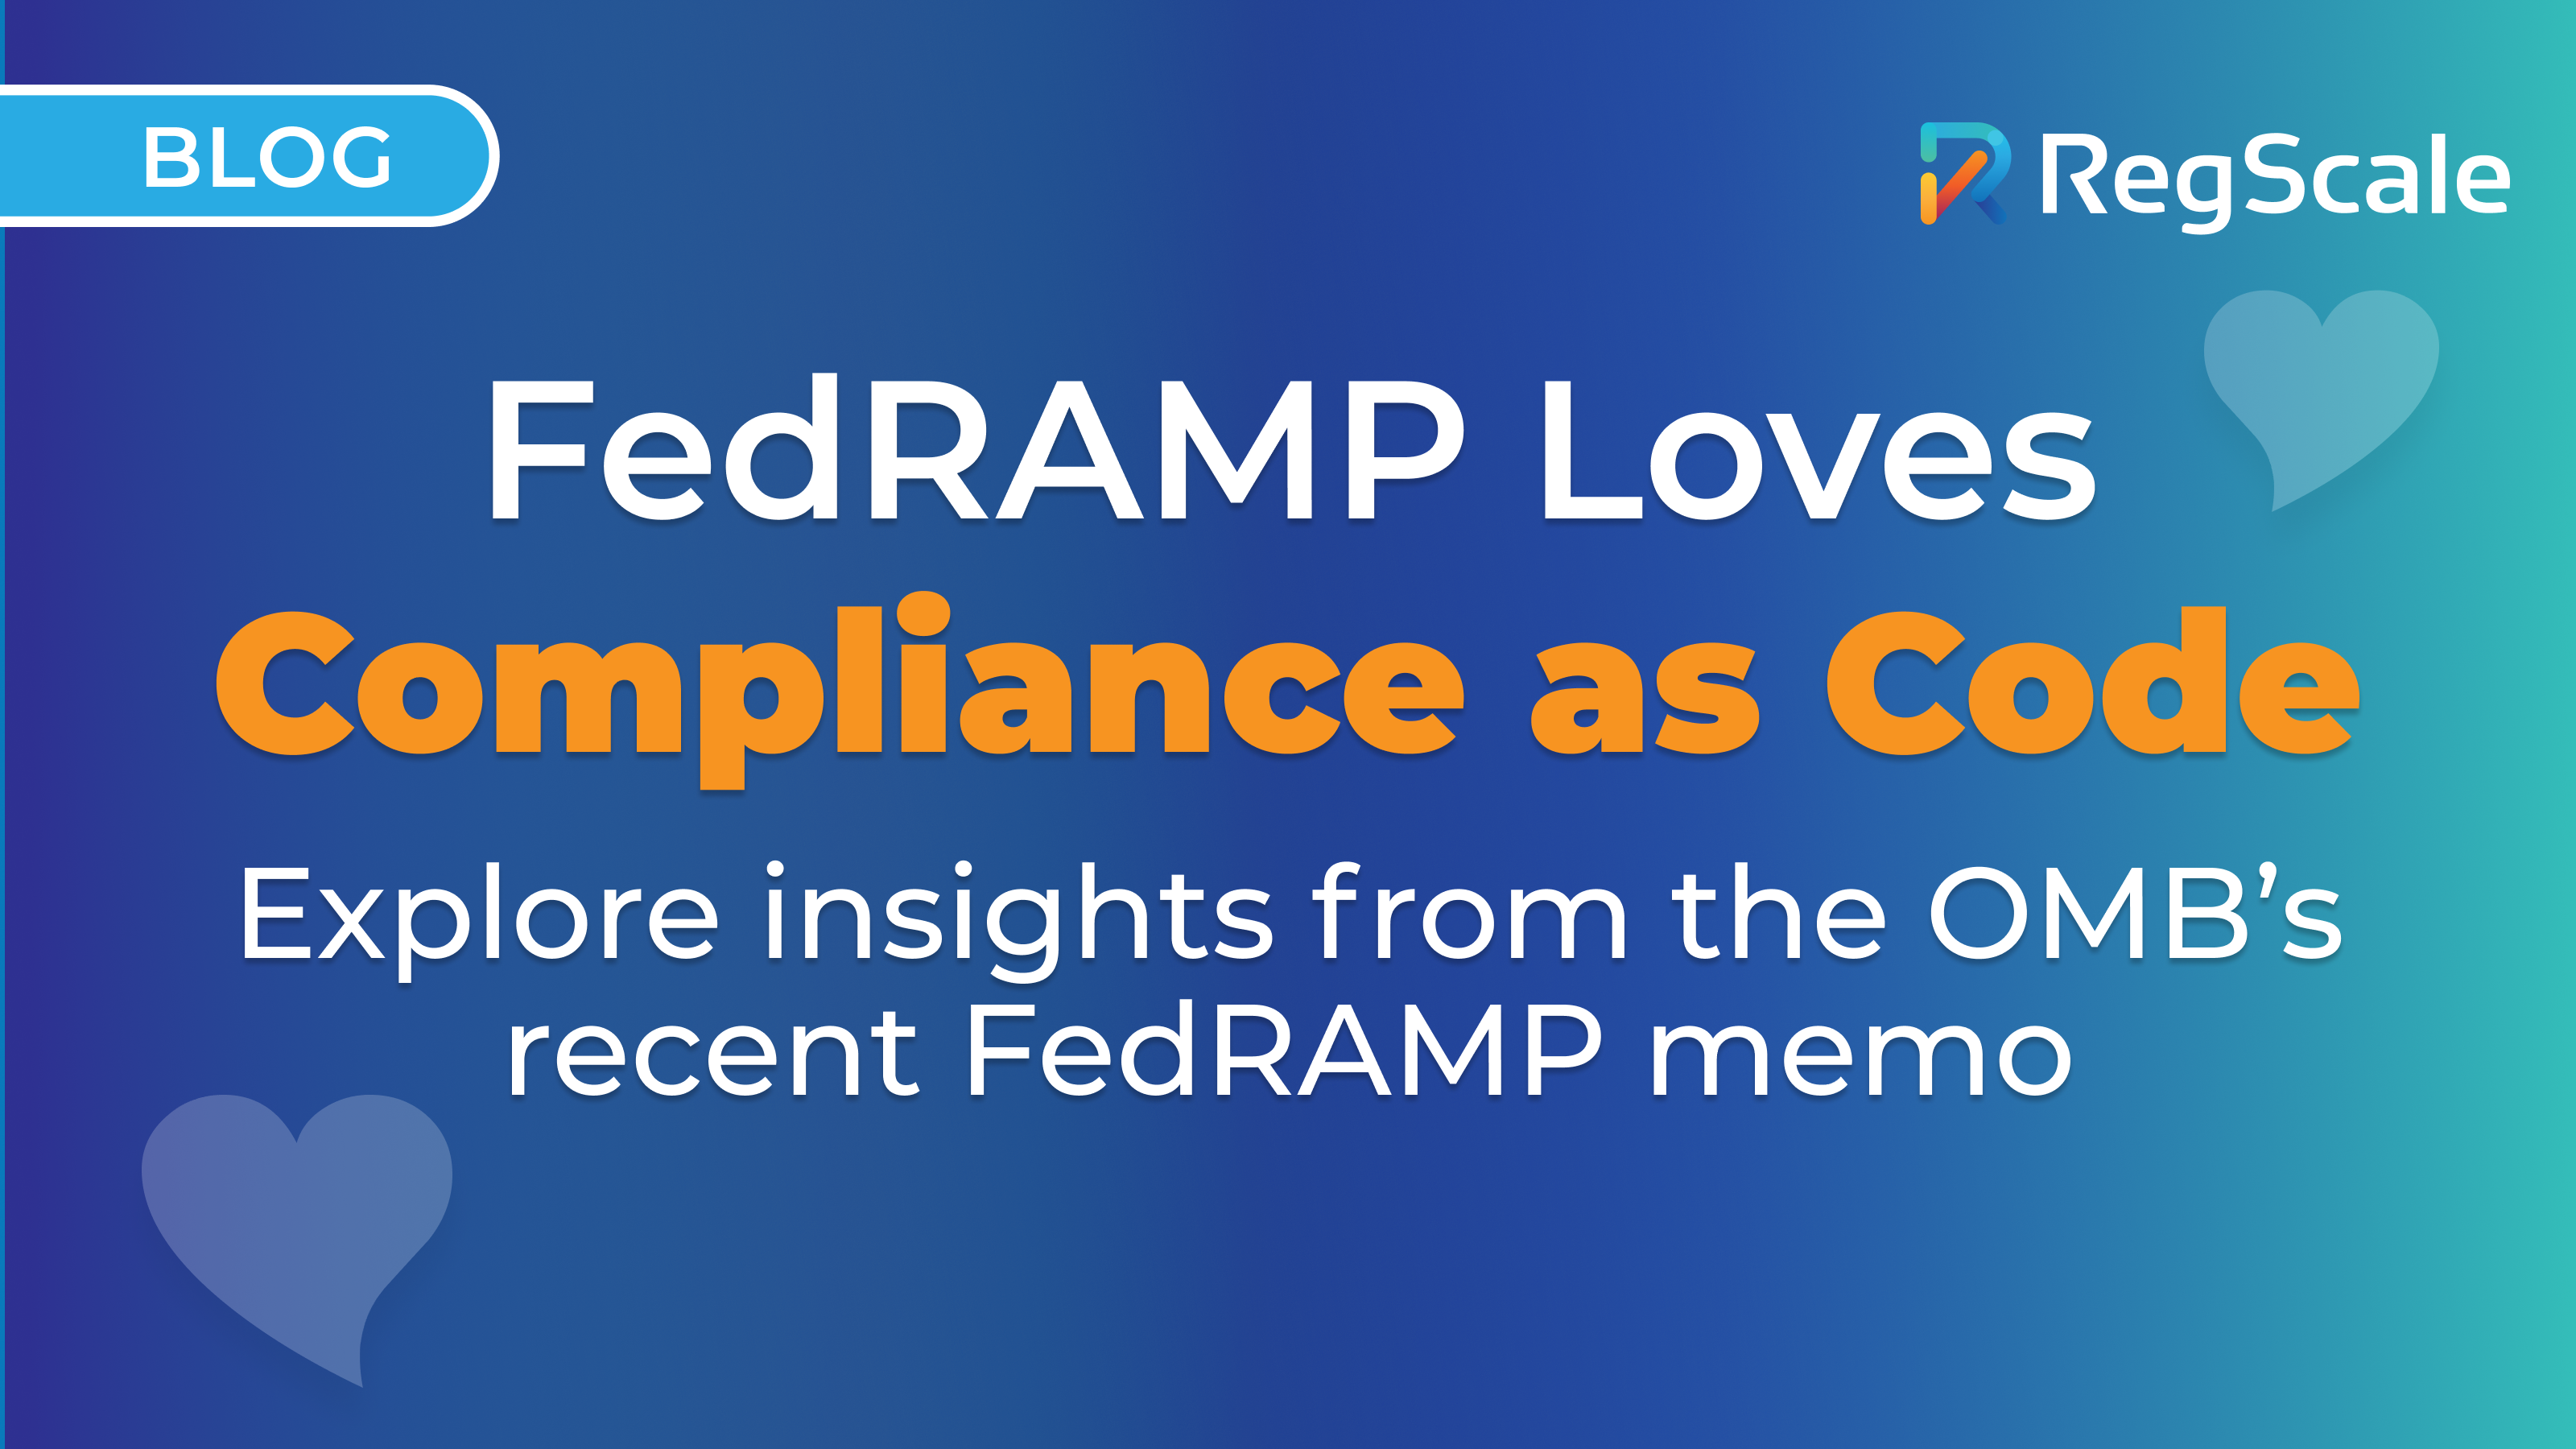 FedRAMP Loves Compliance as Code: Insights from the OMB’s Recent Memo